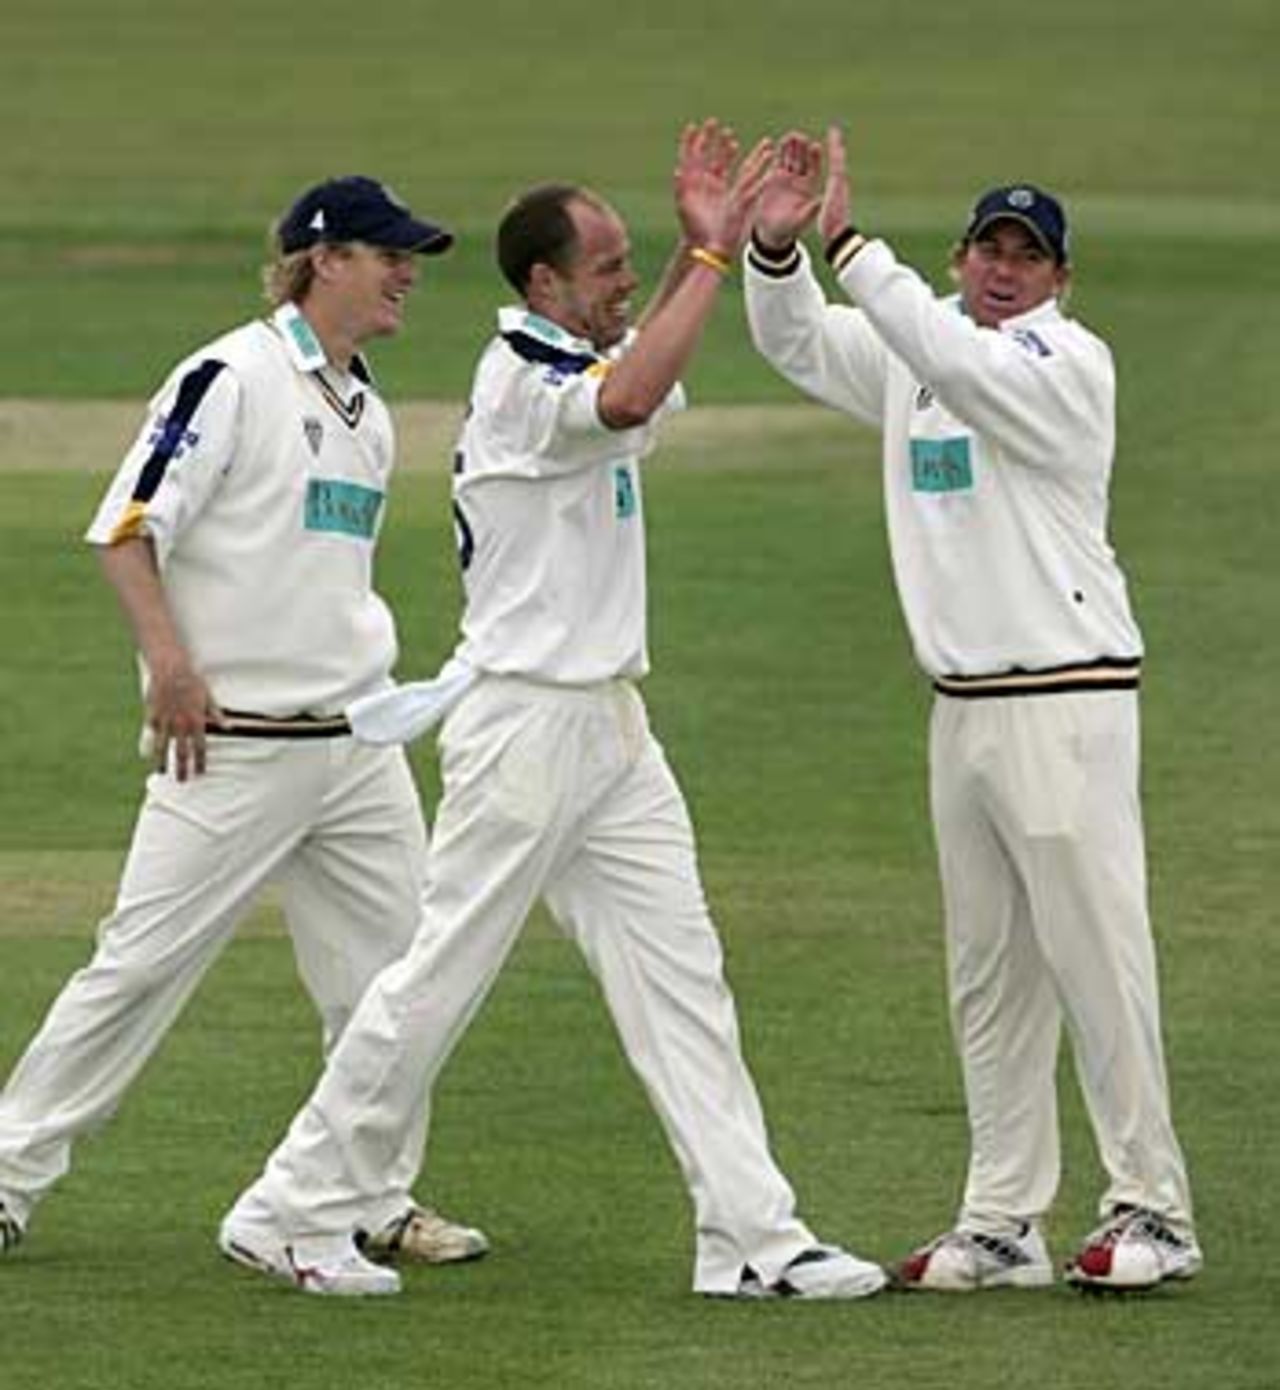 Billy Taylor is congratulated by his captain, Shane Warne on his six wickets, Hampshire v Middlesex, Southampton, May 3, 2006